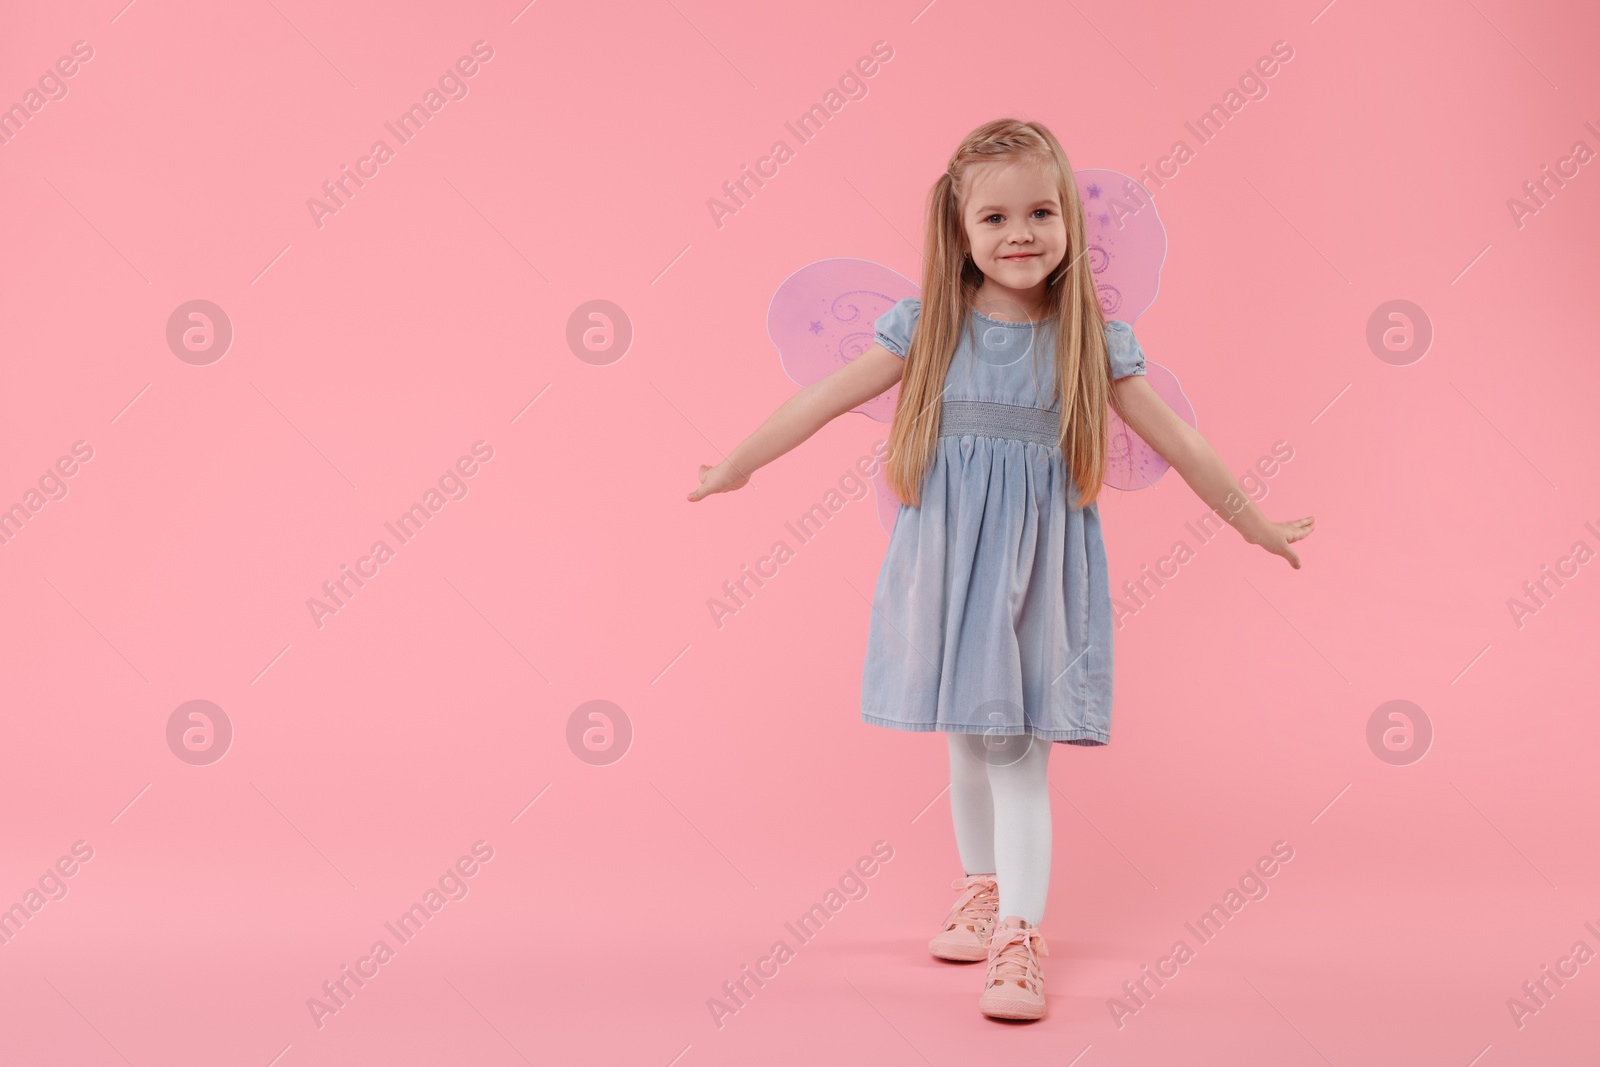 Photo of Cute little girl in fairy costume with violet wings on pink background, space for text